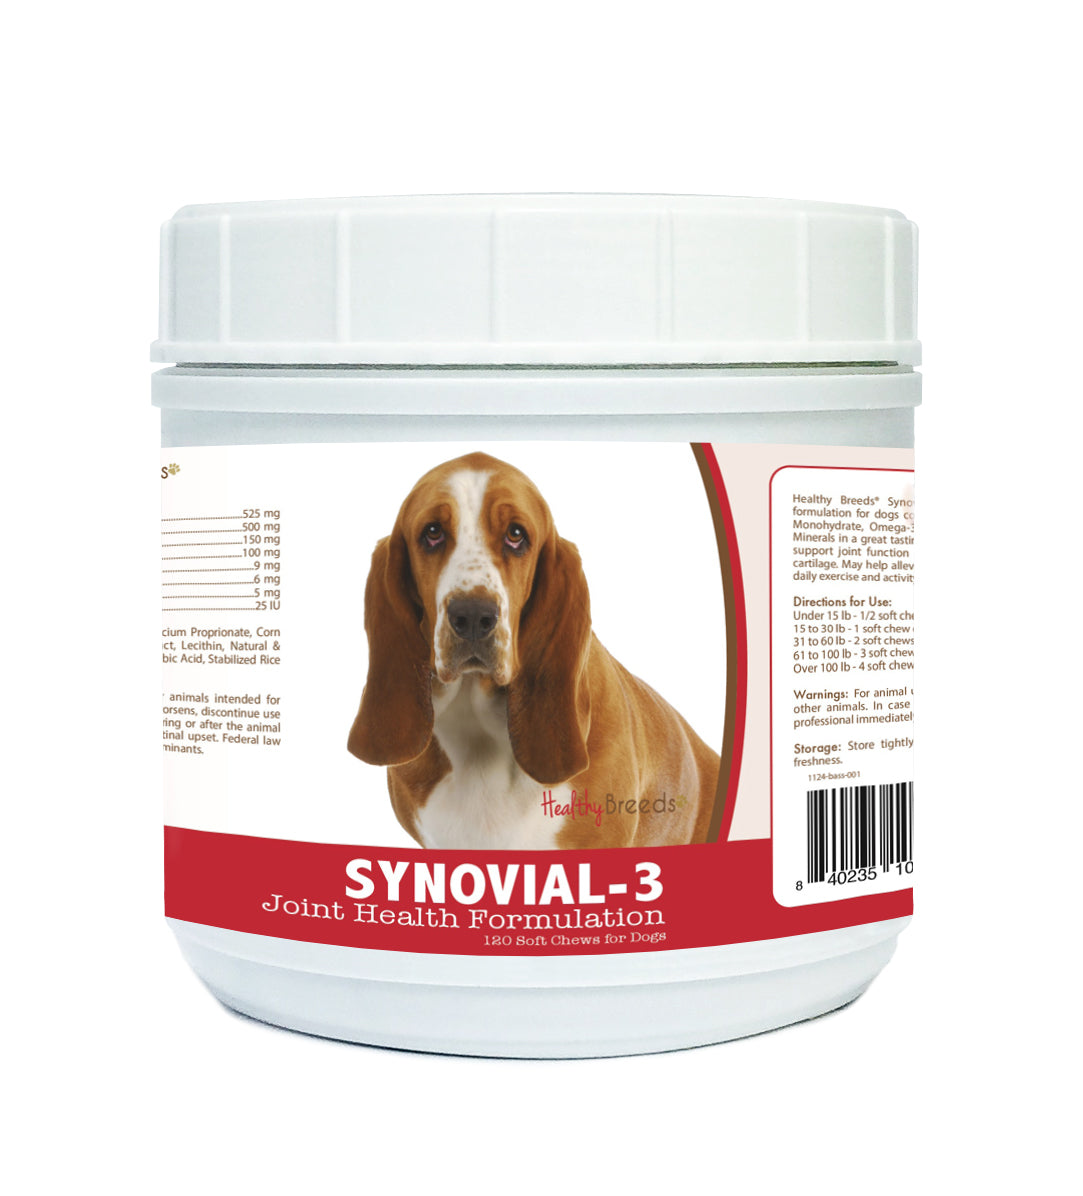 Basset Hound Synovial-3 Joint Health Formulation Soft Chews 120 Count